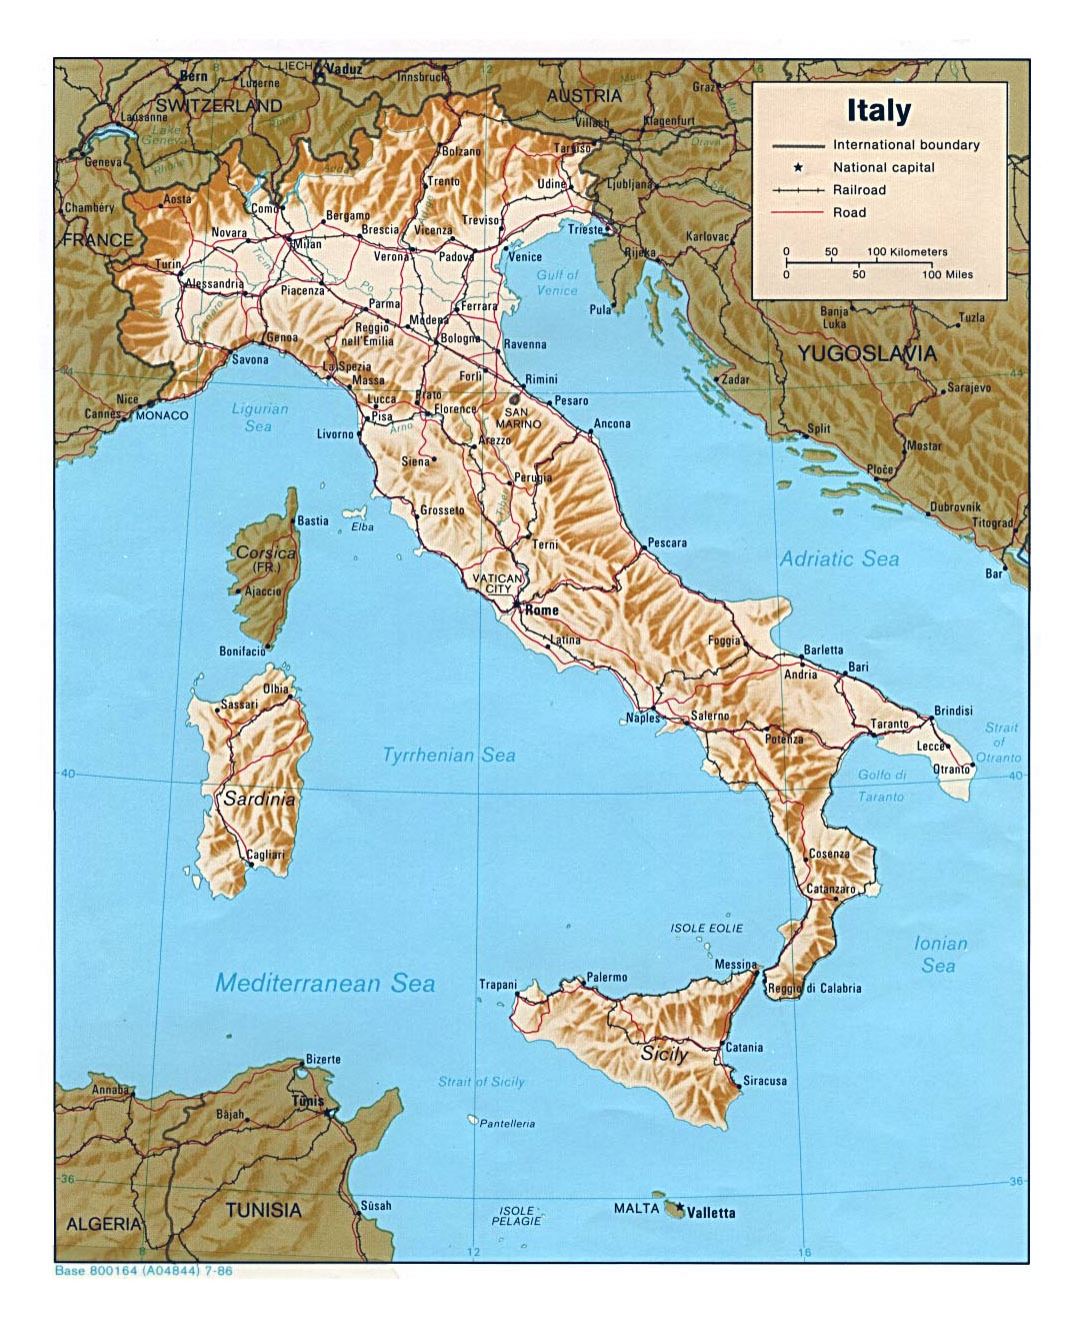 Large political map of Italy with relief, roads, railroads and major cities - 1986